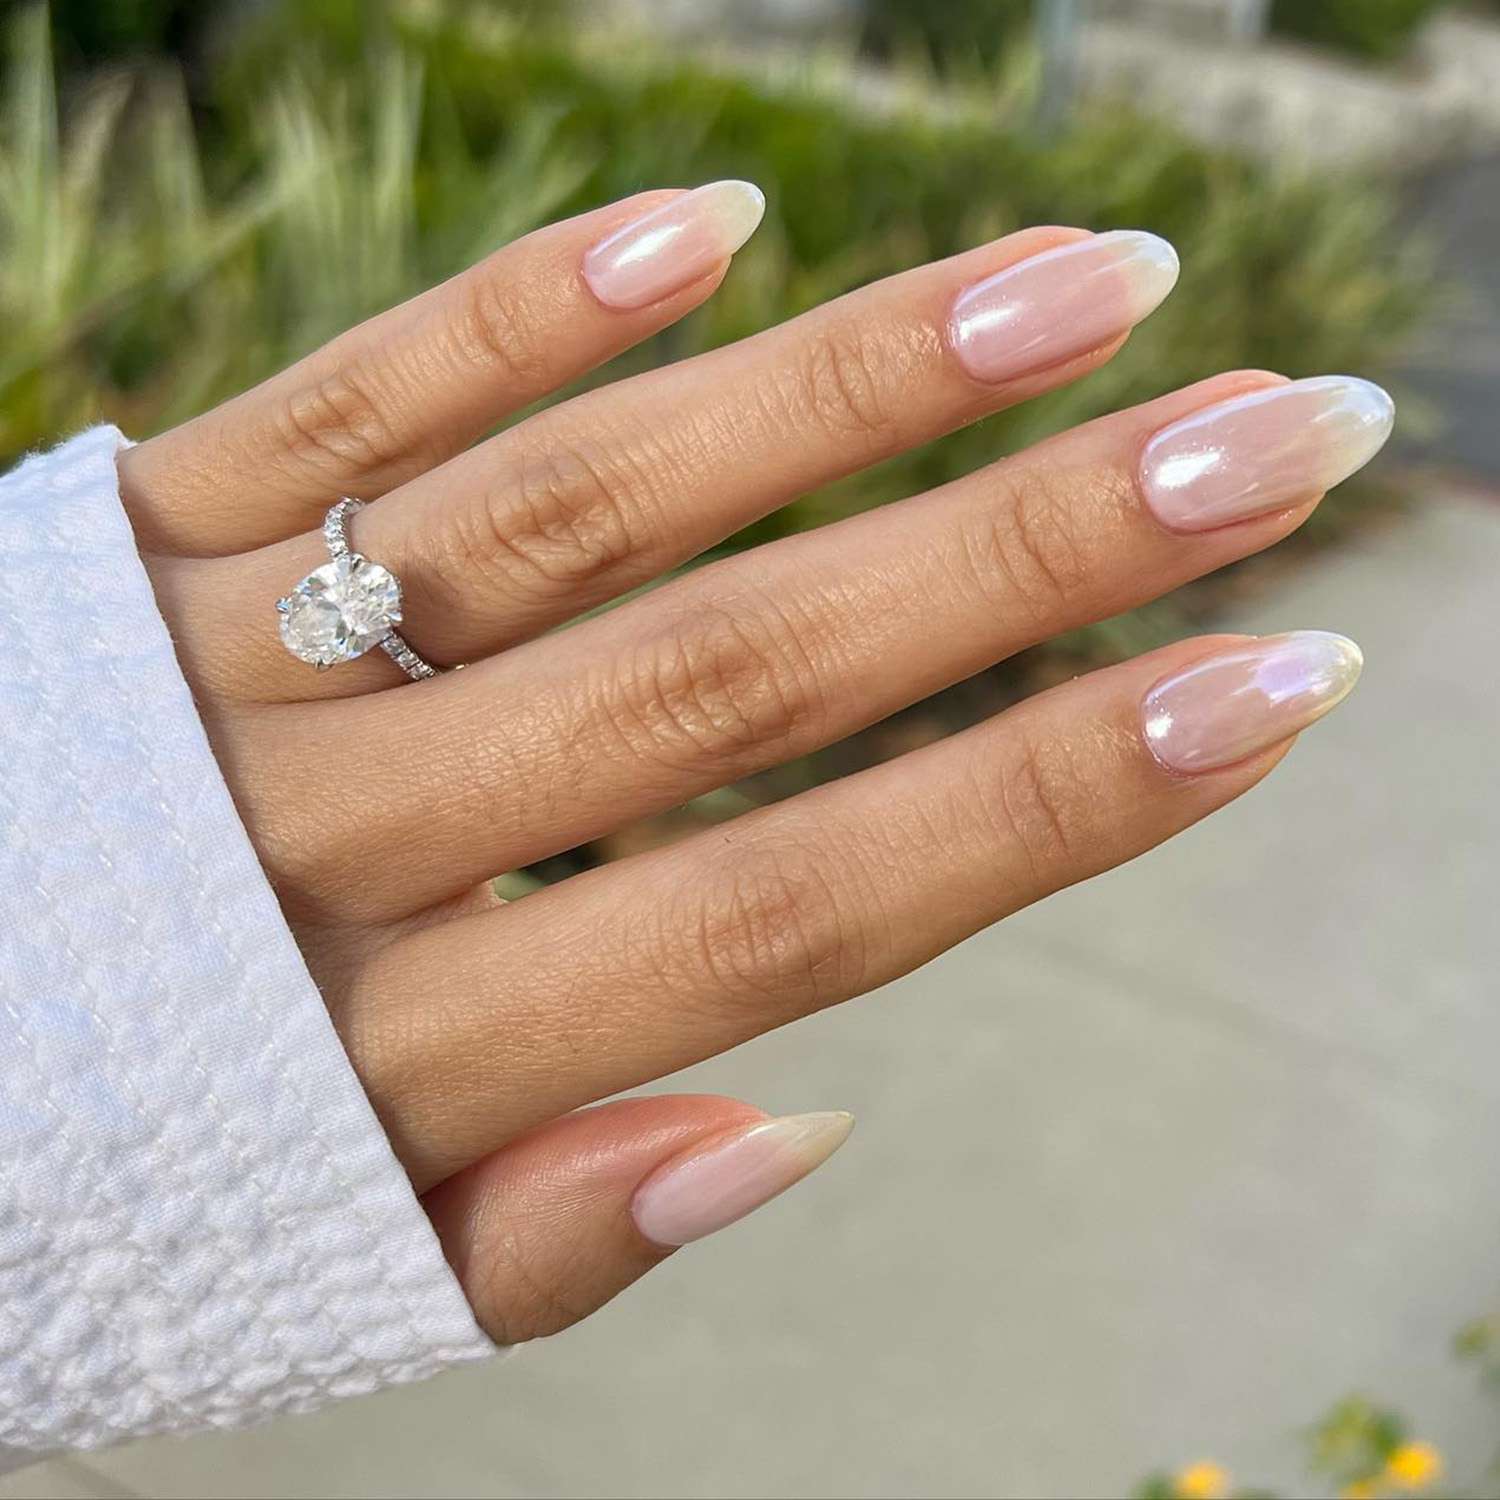 What are Chrome Nails?